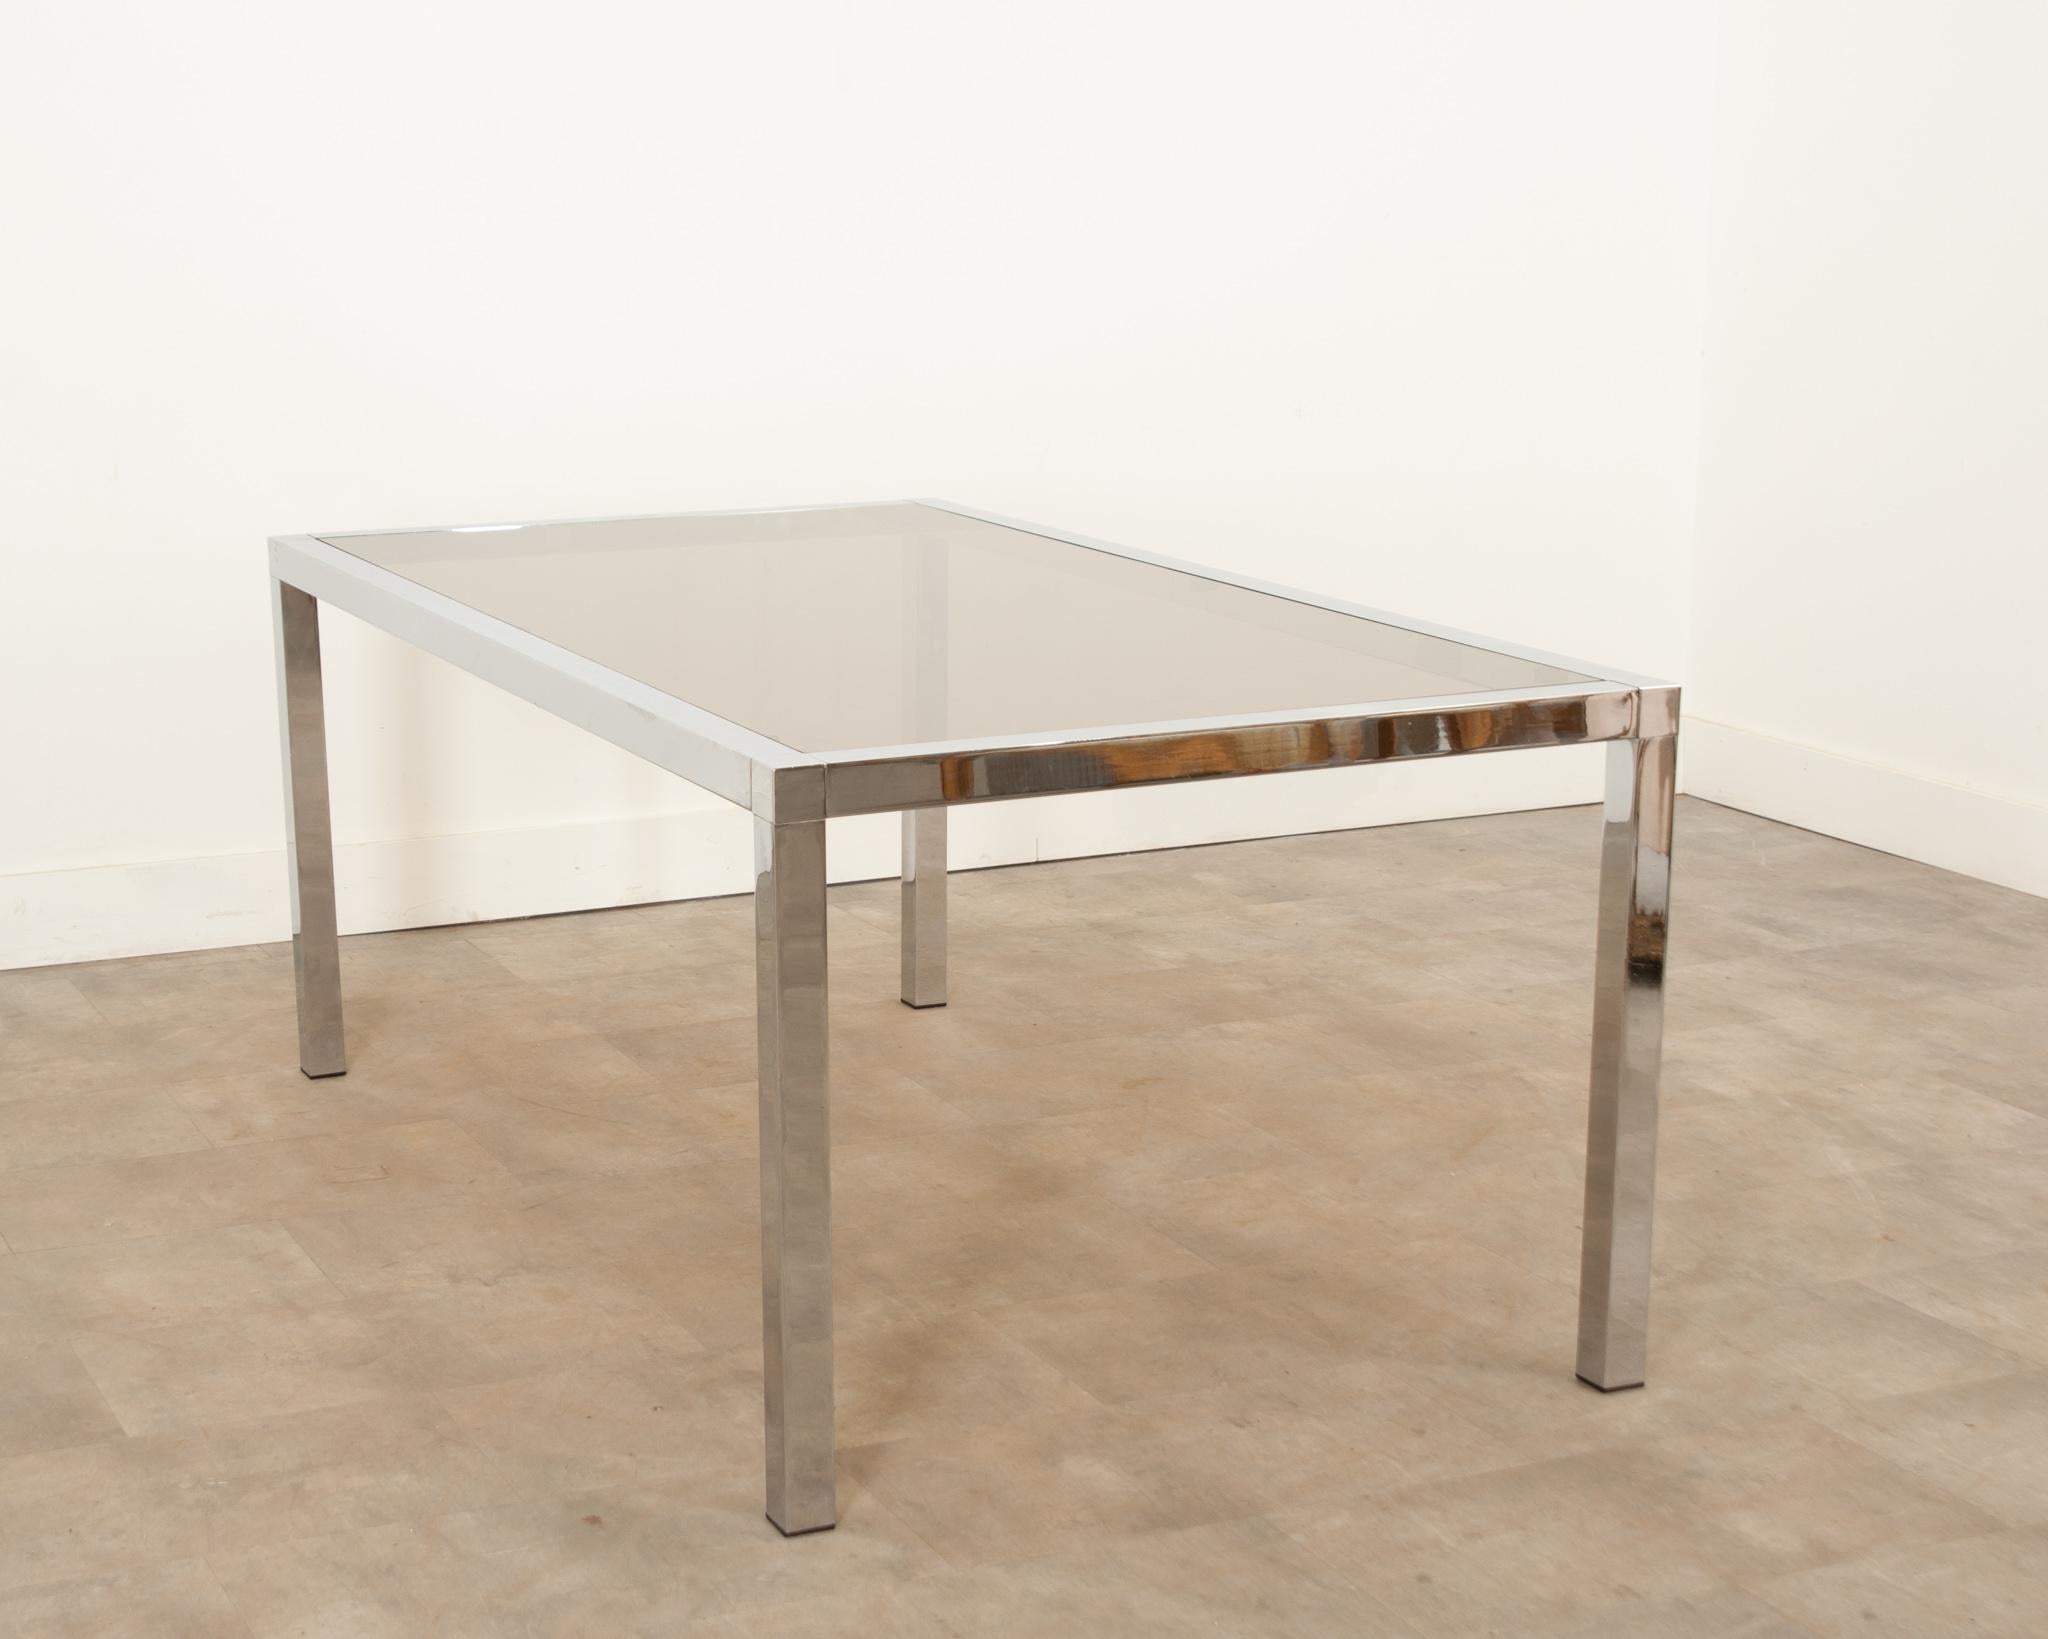 A French Mid-Century Modern dining room table in wonderful vintage condition. The large single pane of tinted glass is removable and fits seamlessly into the chrome frame. The rectangular frame has very minor wear and is capped with four protective